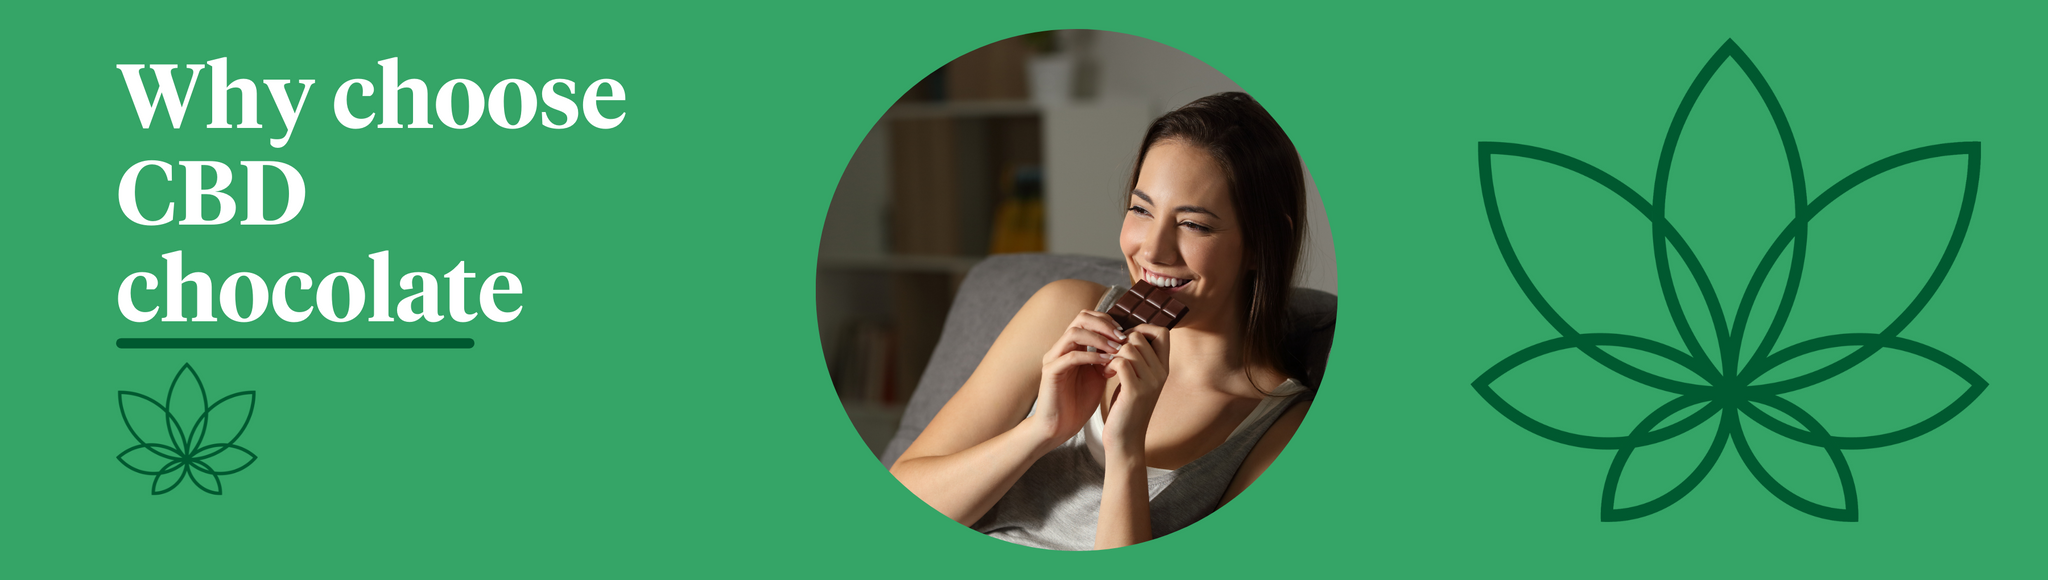 A green background with the Supreme CBD logo to the right of the image with a person in the centre enjoying a bar of homemade CBD infused chocolate.